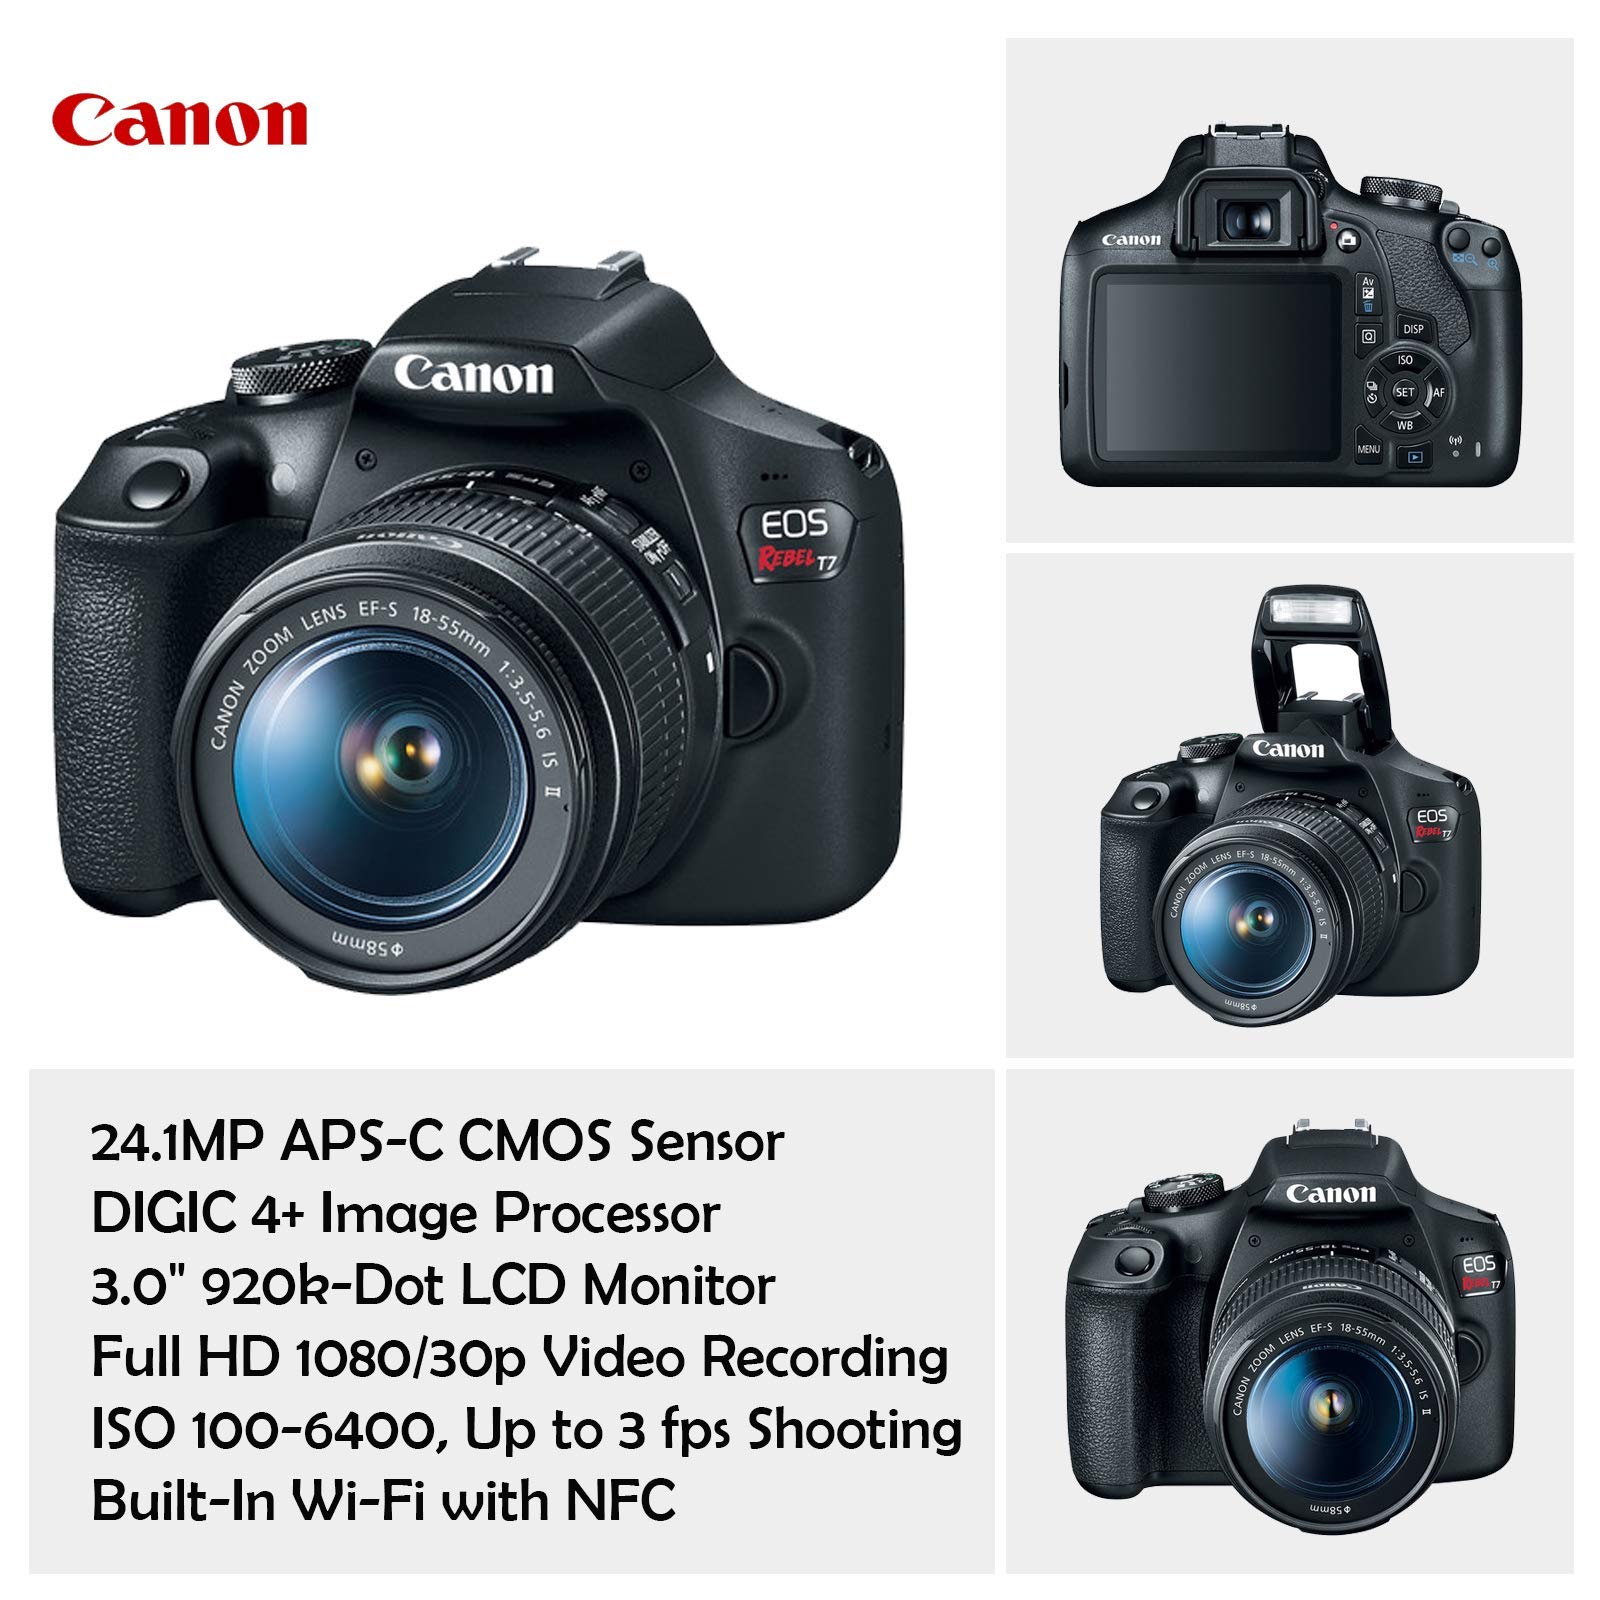 Canon EOS Rebel T7 DSLR Camera with 18-55mm is II Lens + Canon EF 75-300mm f/4-5.6 III Lens and 500mm Preset Lens + 32GB Memory + Filters + Monopod + Professional Bundle